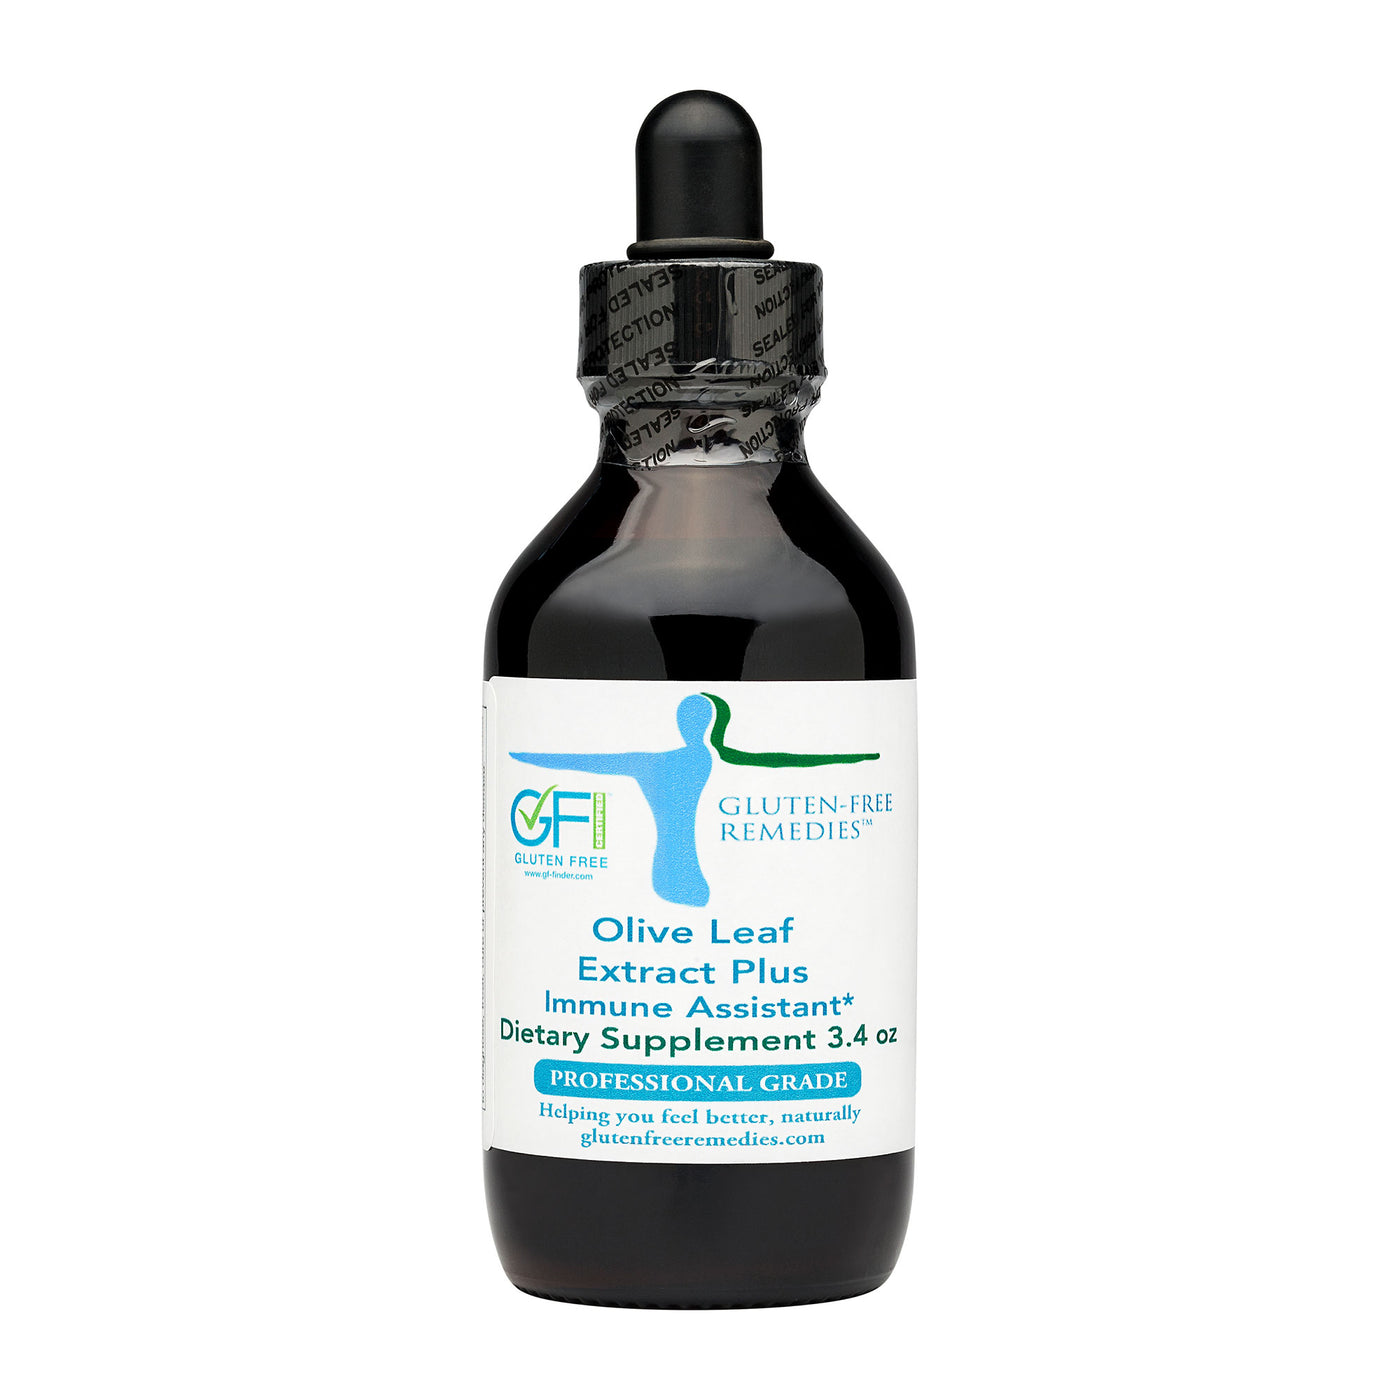 Gluten Free Remedies Olive Leaf Extract bottle